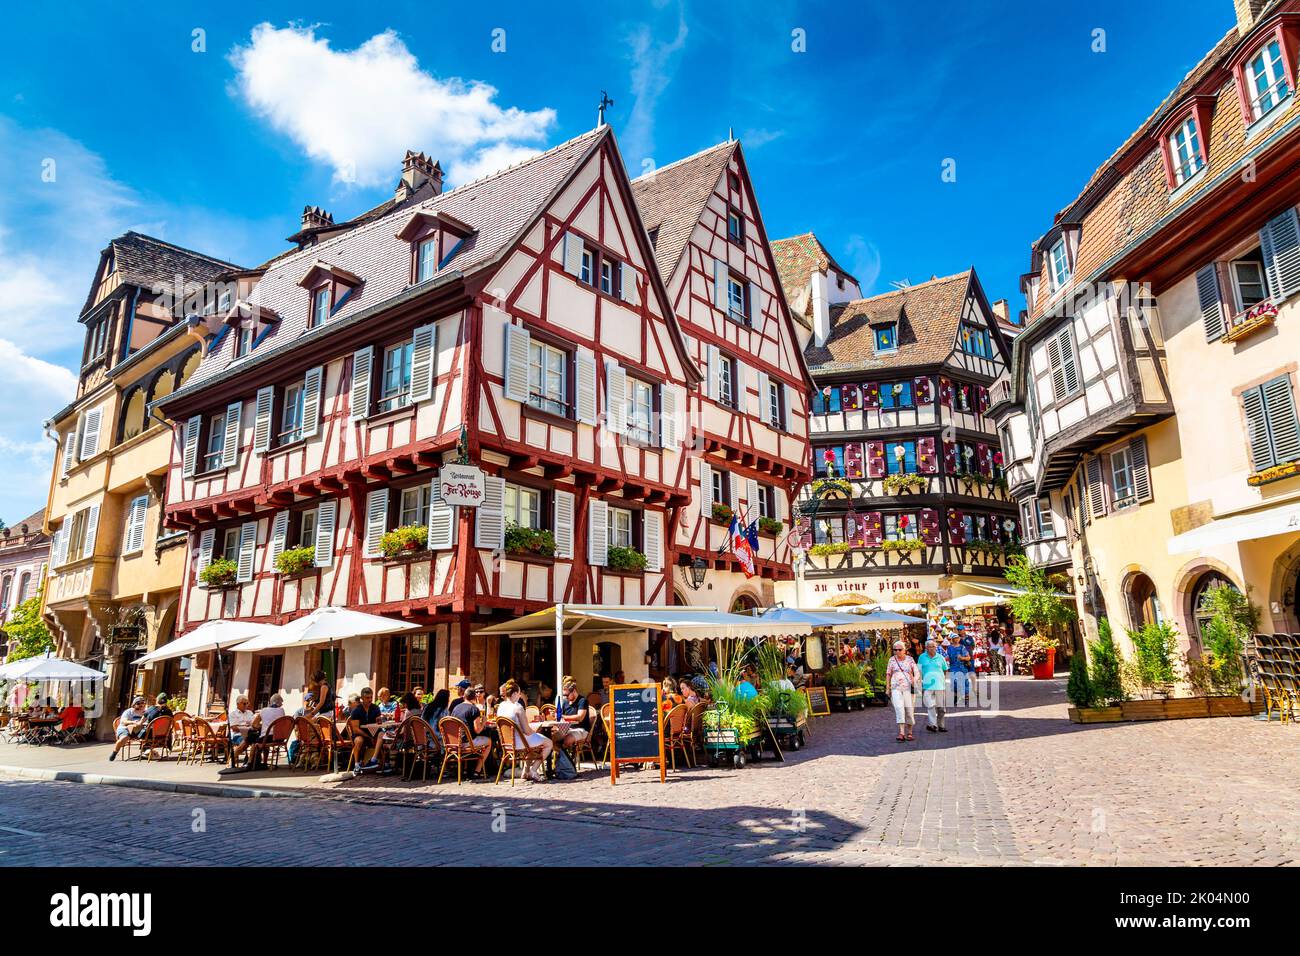 Half-timbered houses on Grand Rue in the medieval fairy tale town of Colmar, Alsace, France Stock Photo